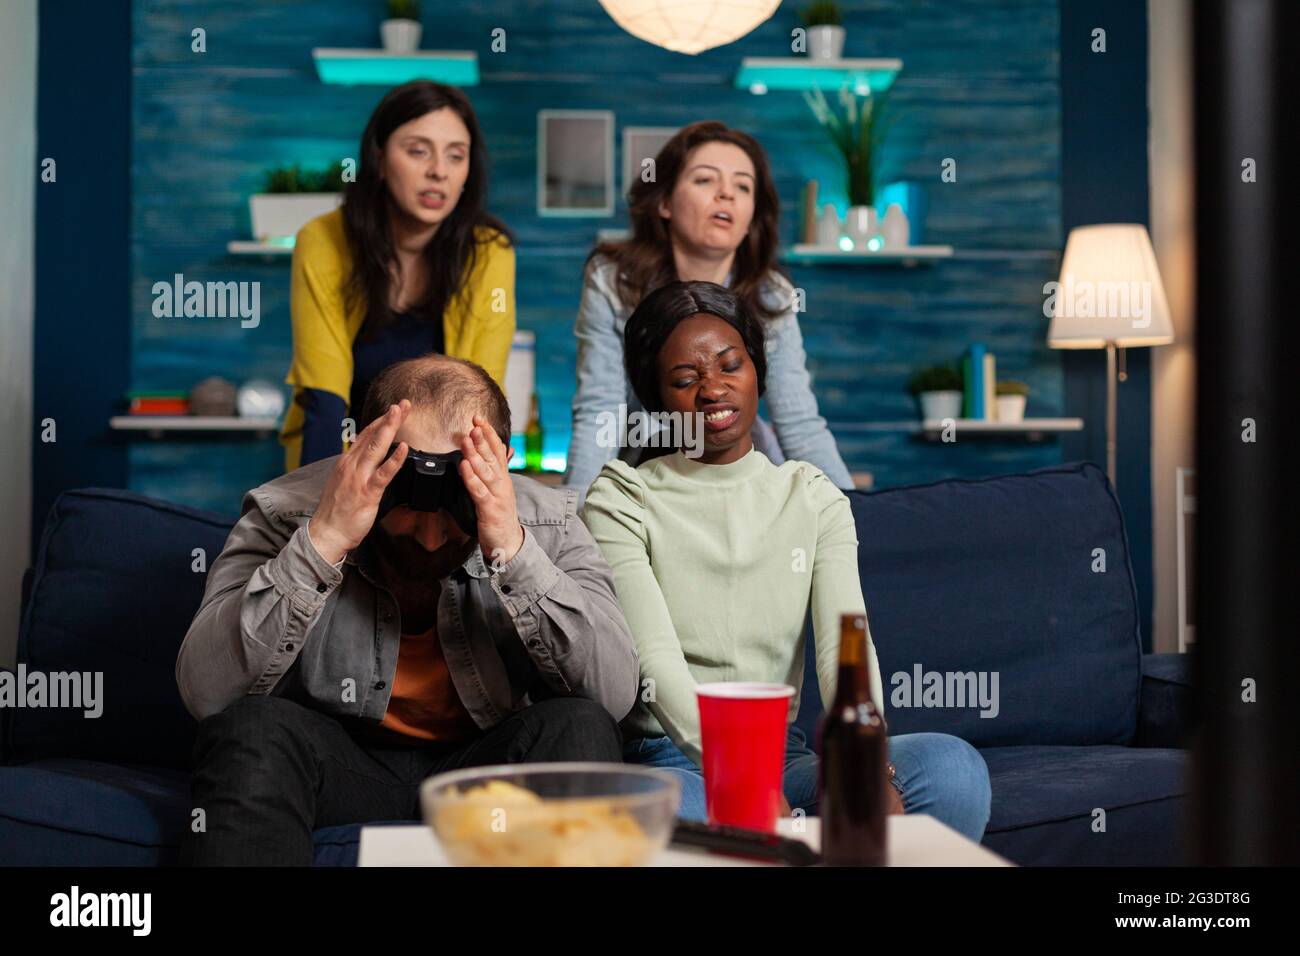 Angry man and multi ethnic friends upset after losing game competition, bonding and sitting on couch after drinking beer. Mixed race group of people hanging out together having fun late at night in living room Stock Photo